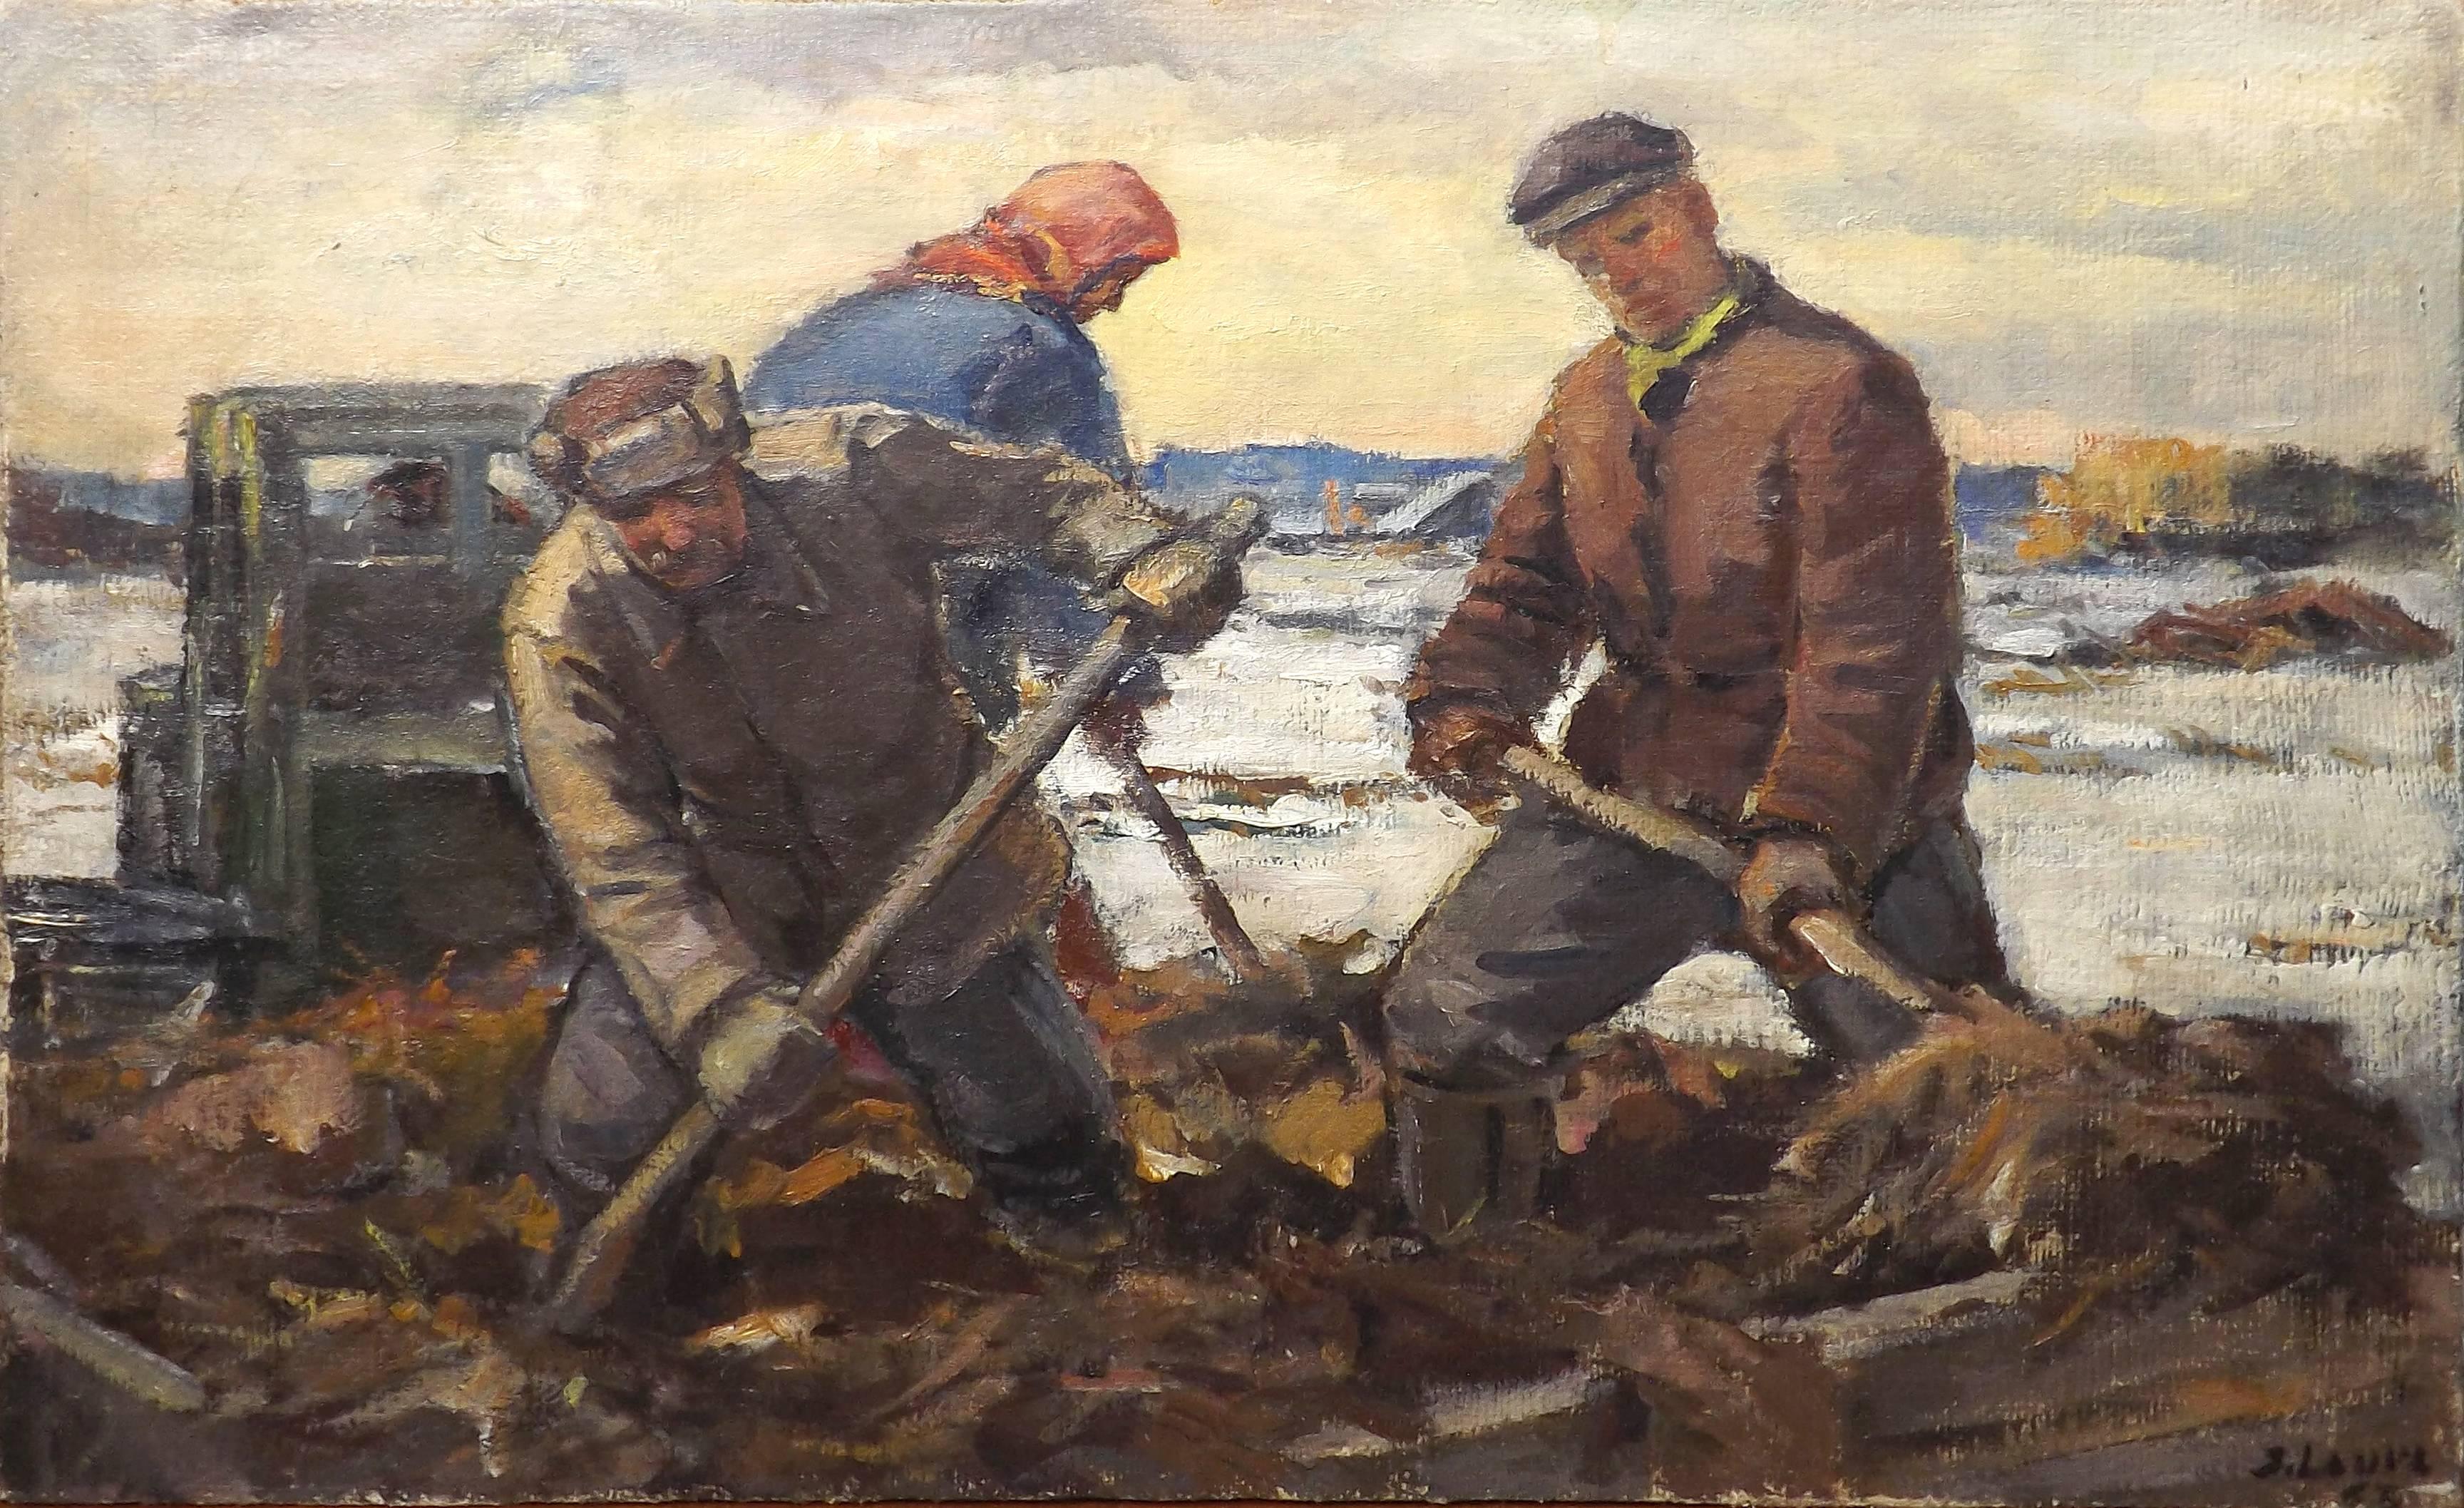 A wonderful example of Social Realist painting by Latvian artist Janis Lauva (1906-1986). Three farmers are hard at work in a field on an early spring morning. Lauva graduated from the Latvian Art Academy in 1934, and was a member of The Soviet